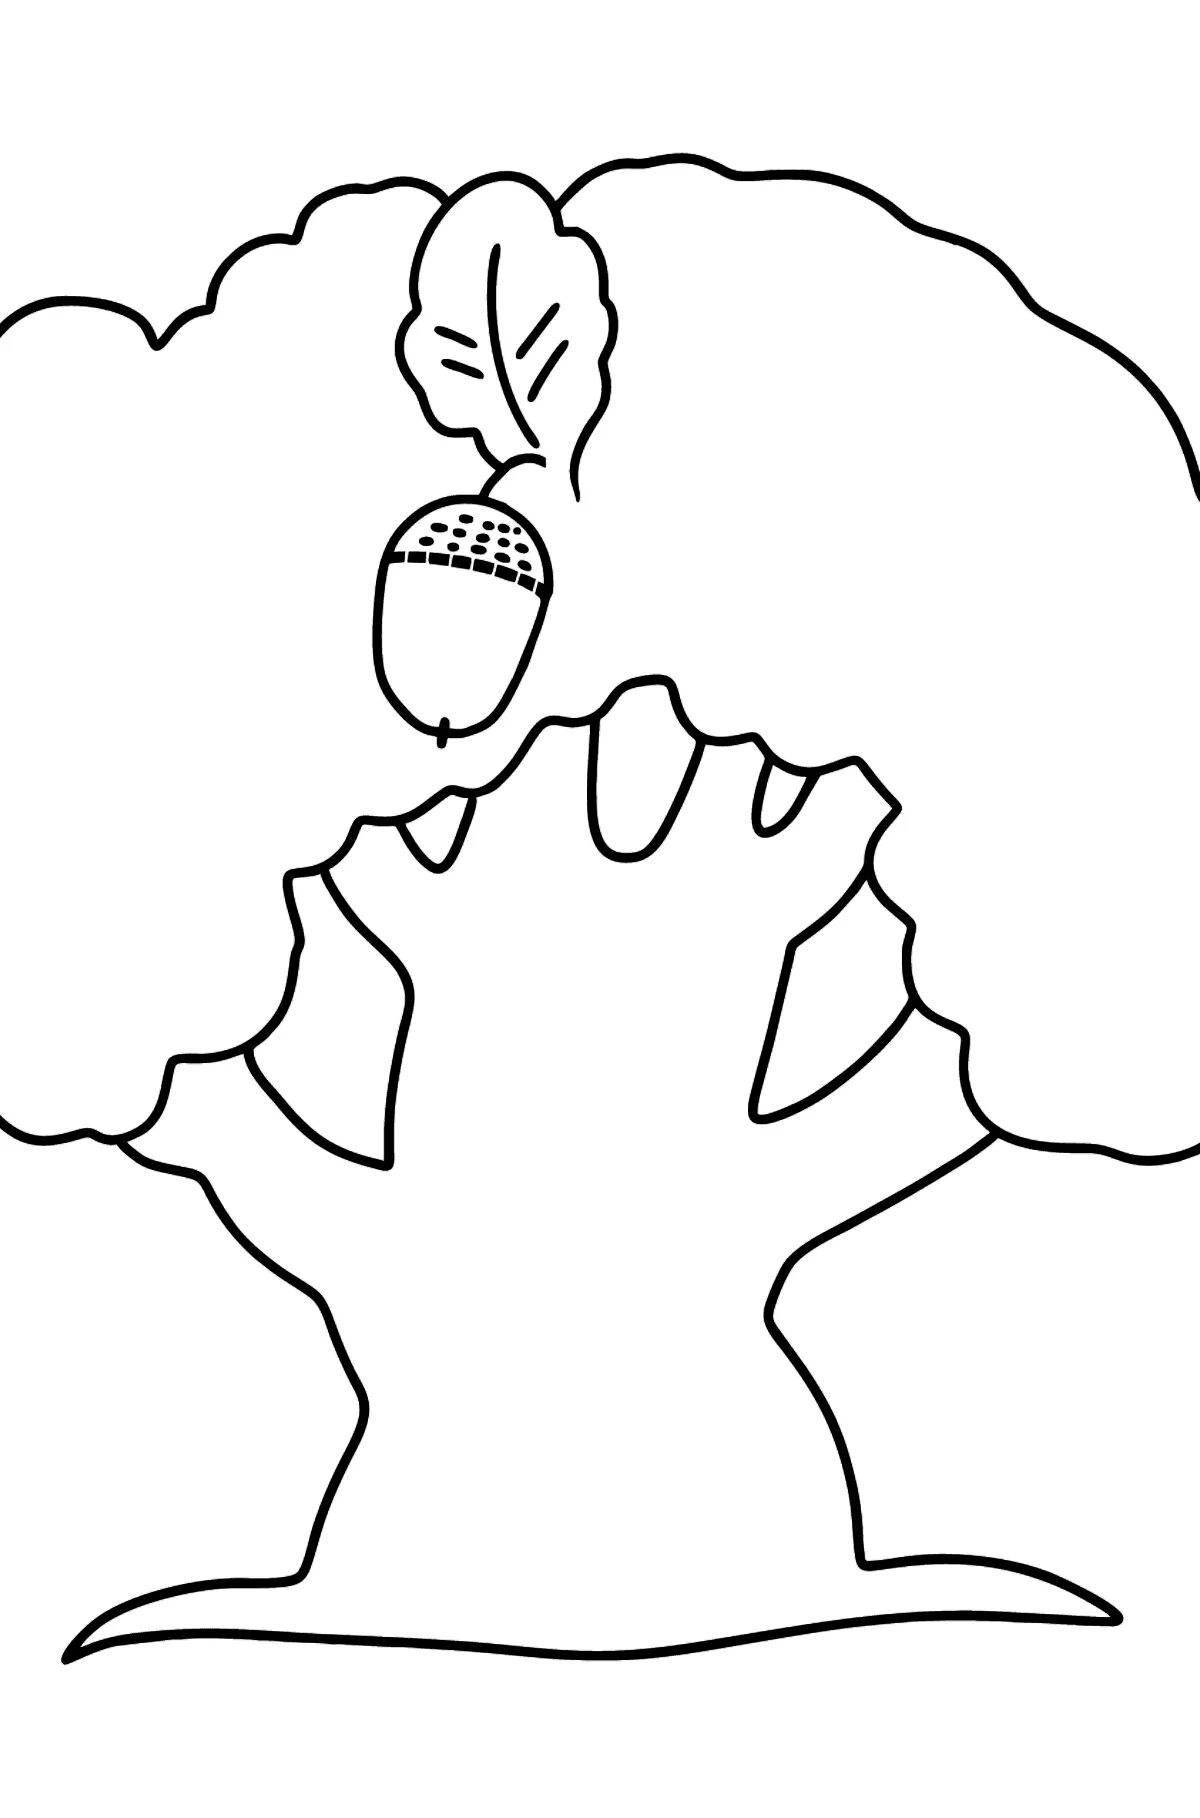 Dazzling Oak Coloring Page for Toddlers